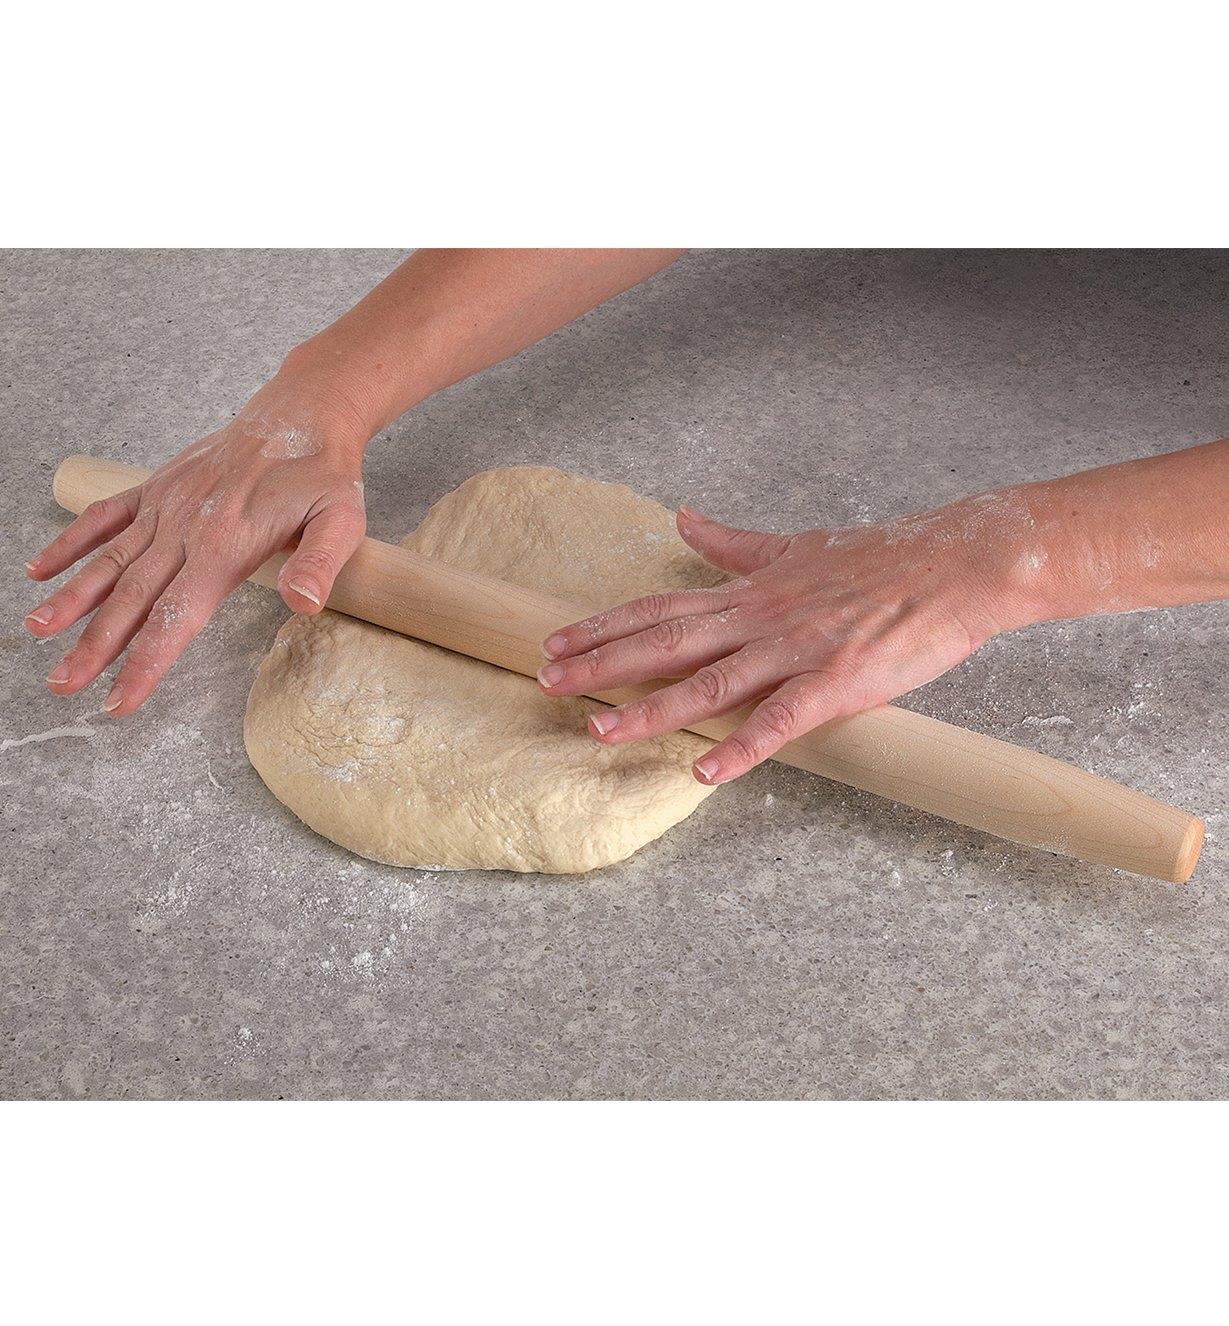 Using the French-Style Rolling Pin to roll out dough